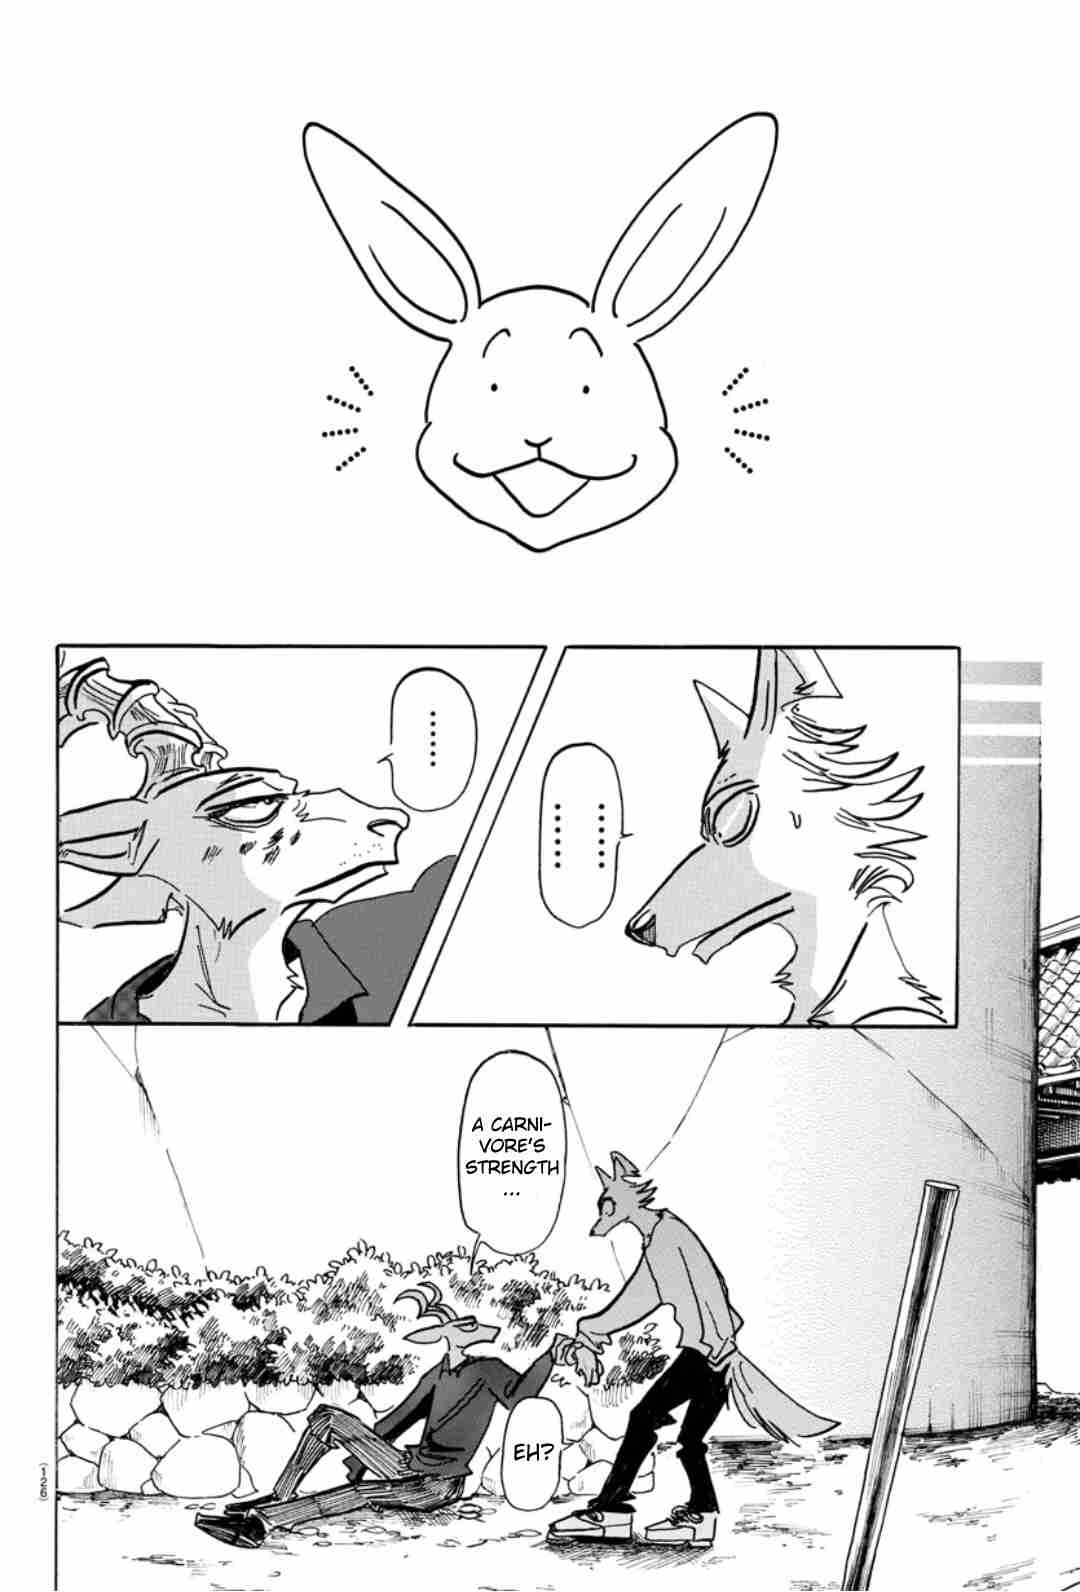 Beastars Vol. 15 Ch. 151 A World in Which Herbivores and Carnivores Coexist.